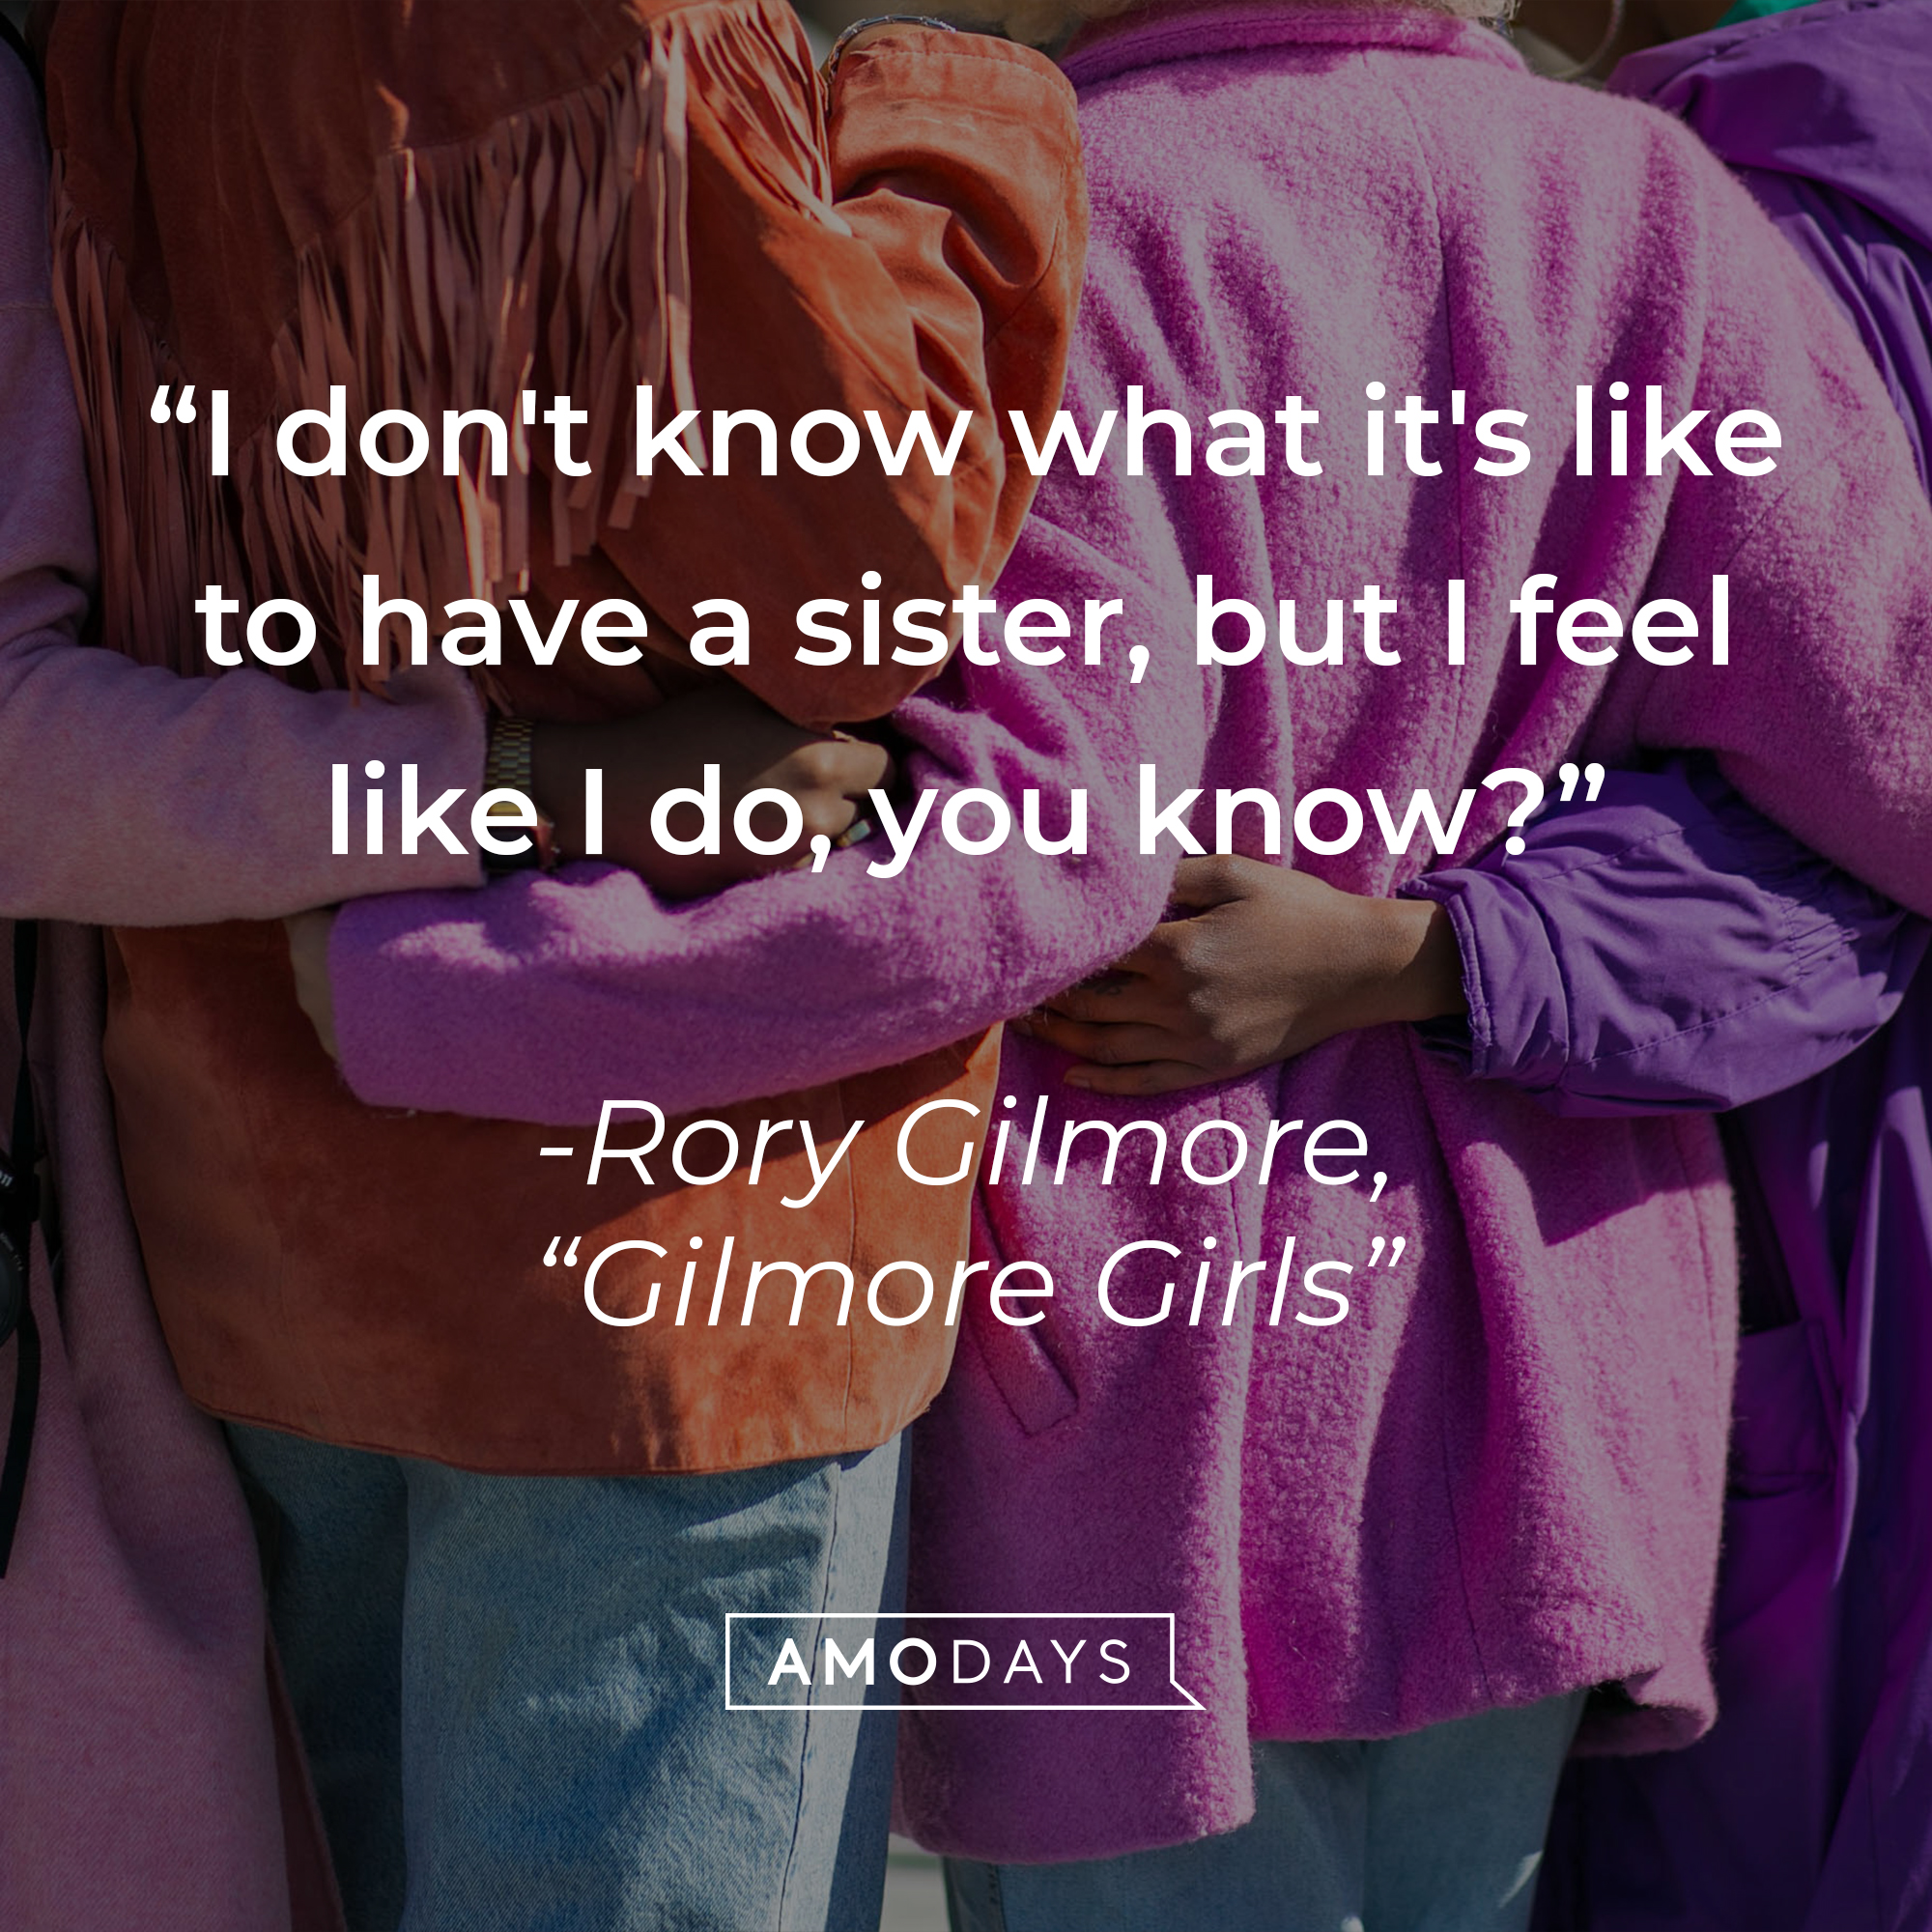 Rory Gilmore's quote: "I don't know what it's like to have a sister, but I feel like I do, you know?" — "Gilmore Girls" | Source: Unsplash